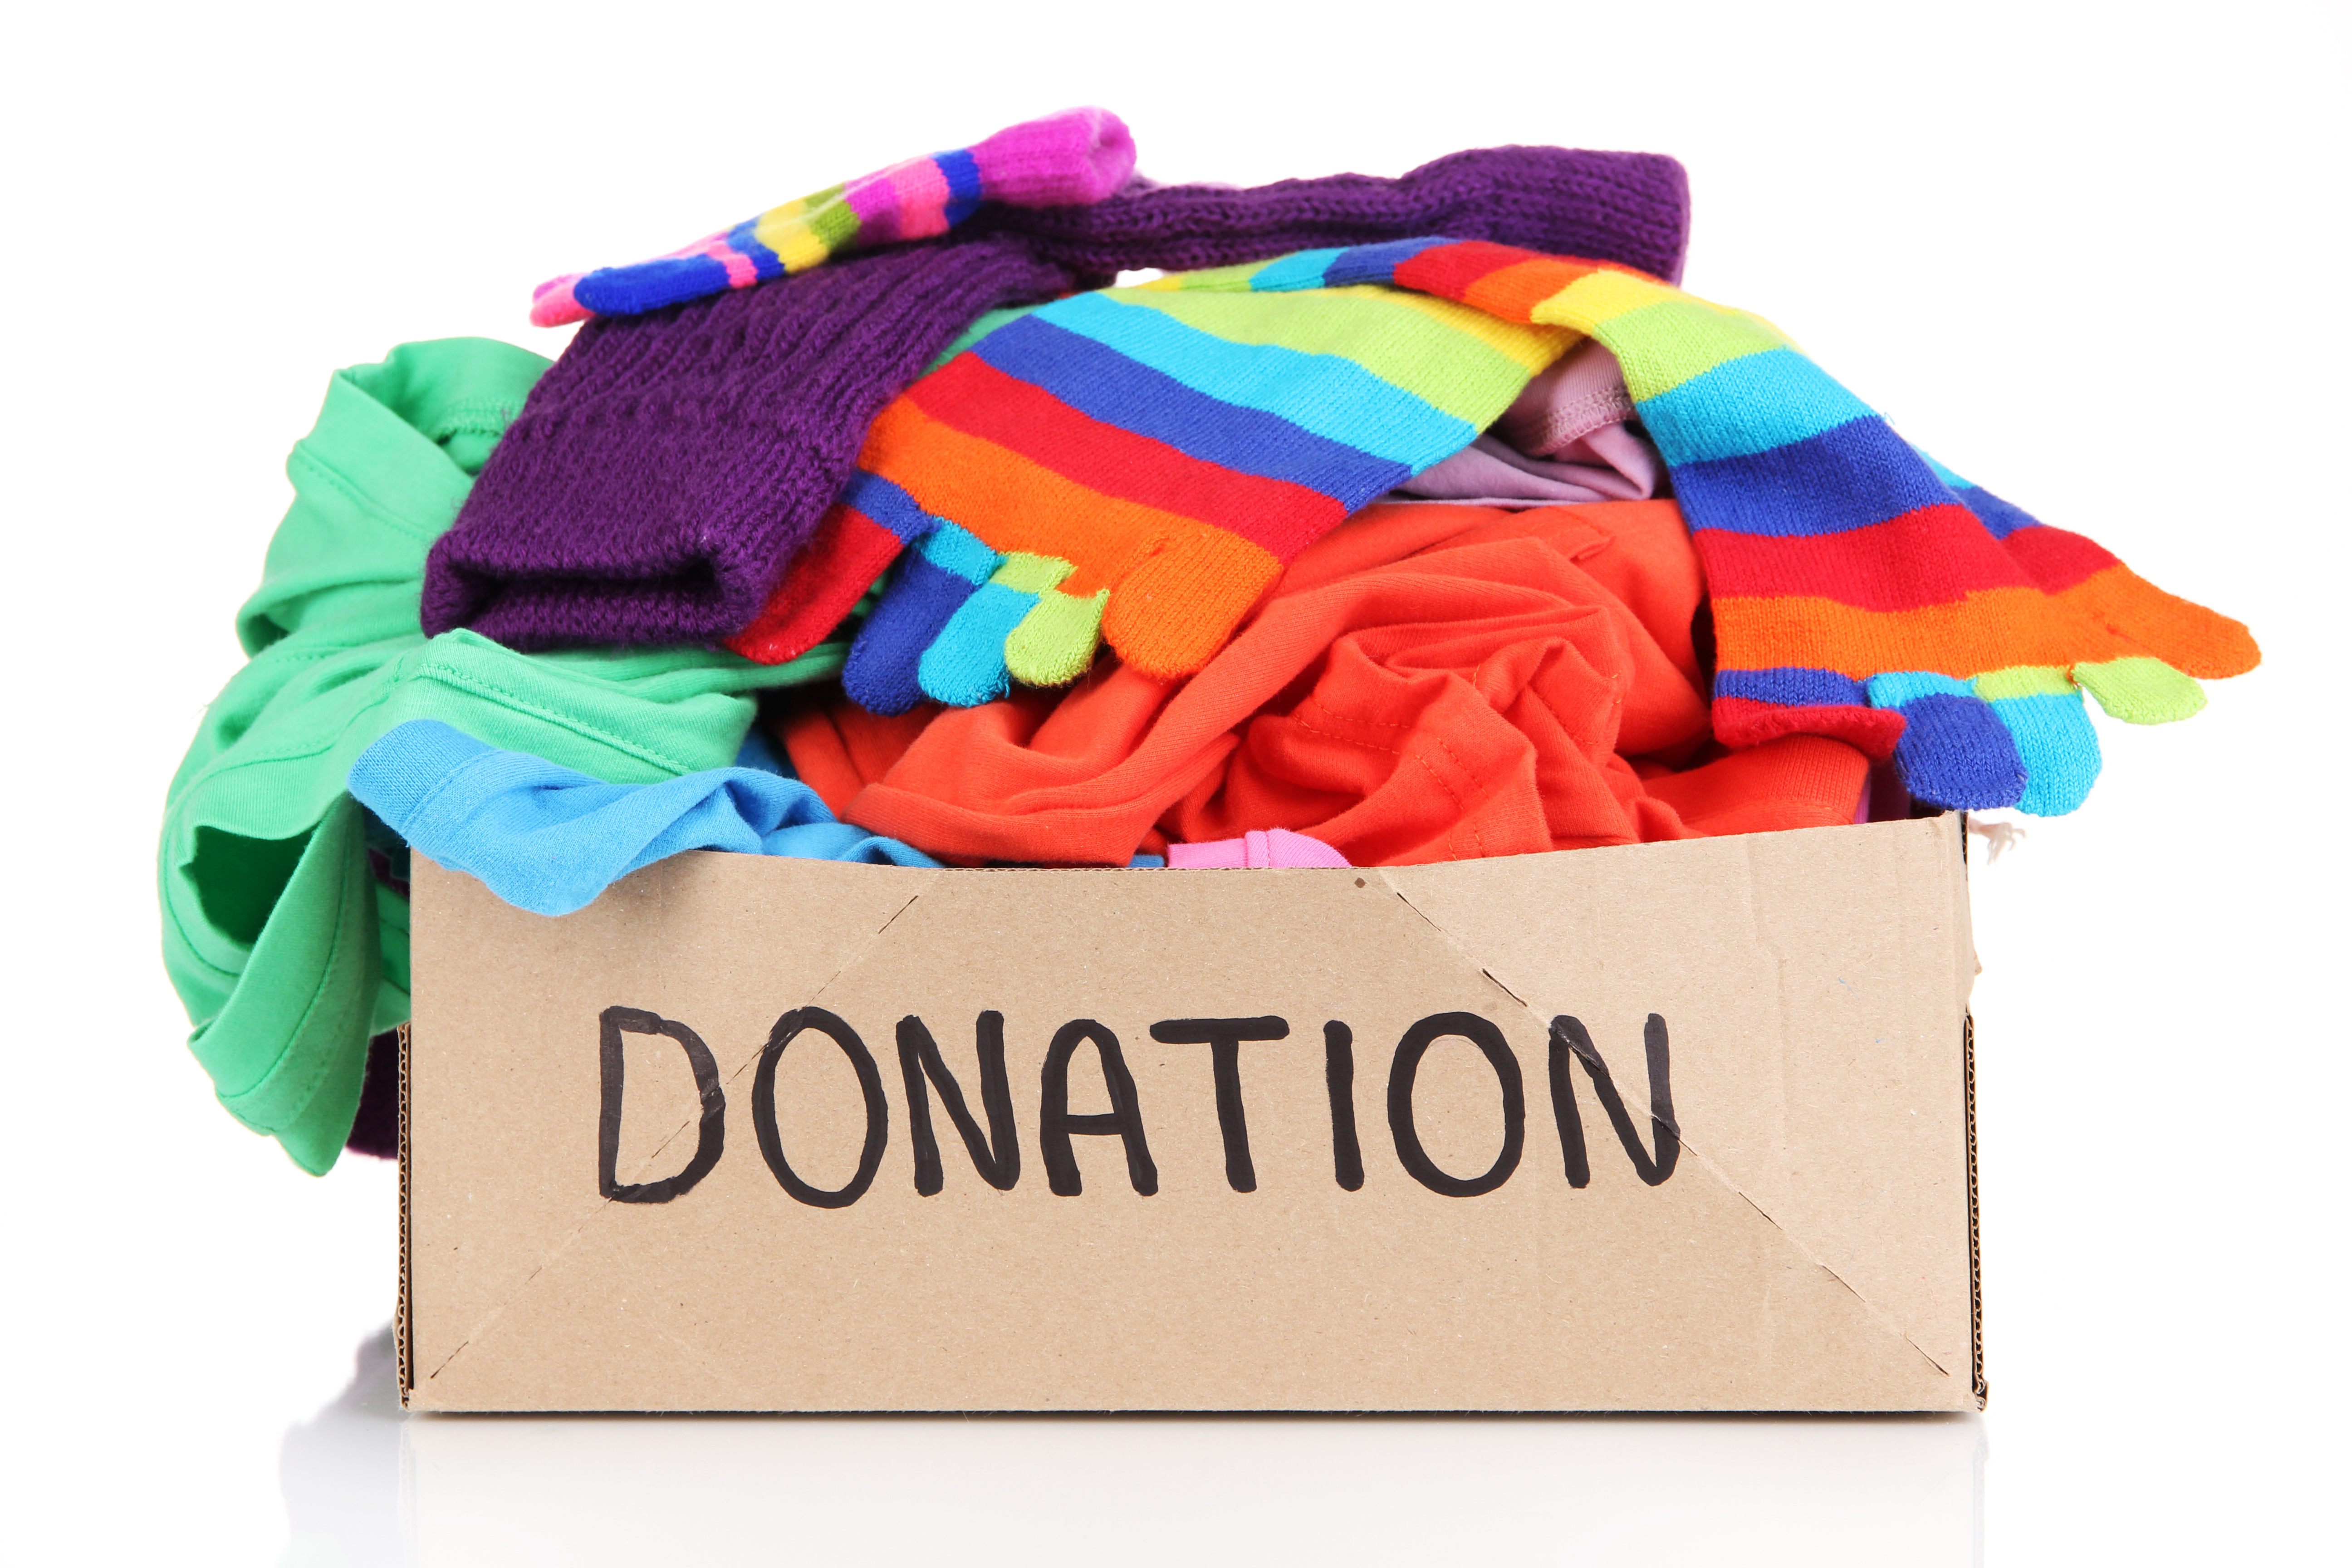 Donate Your Used Clothes to Needy Families